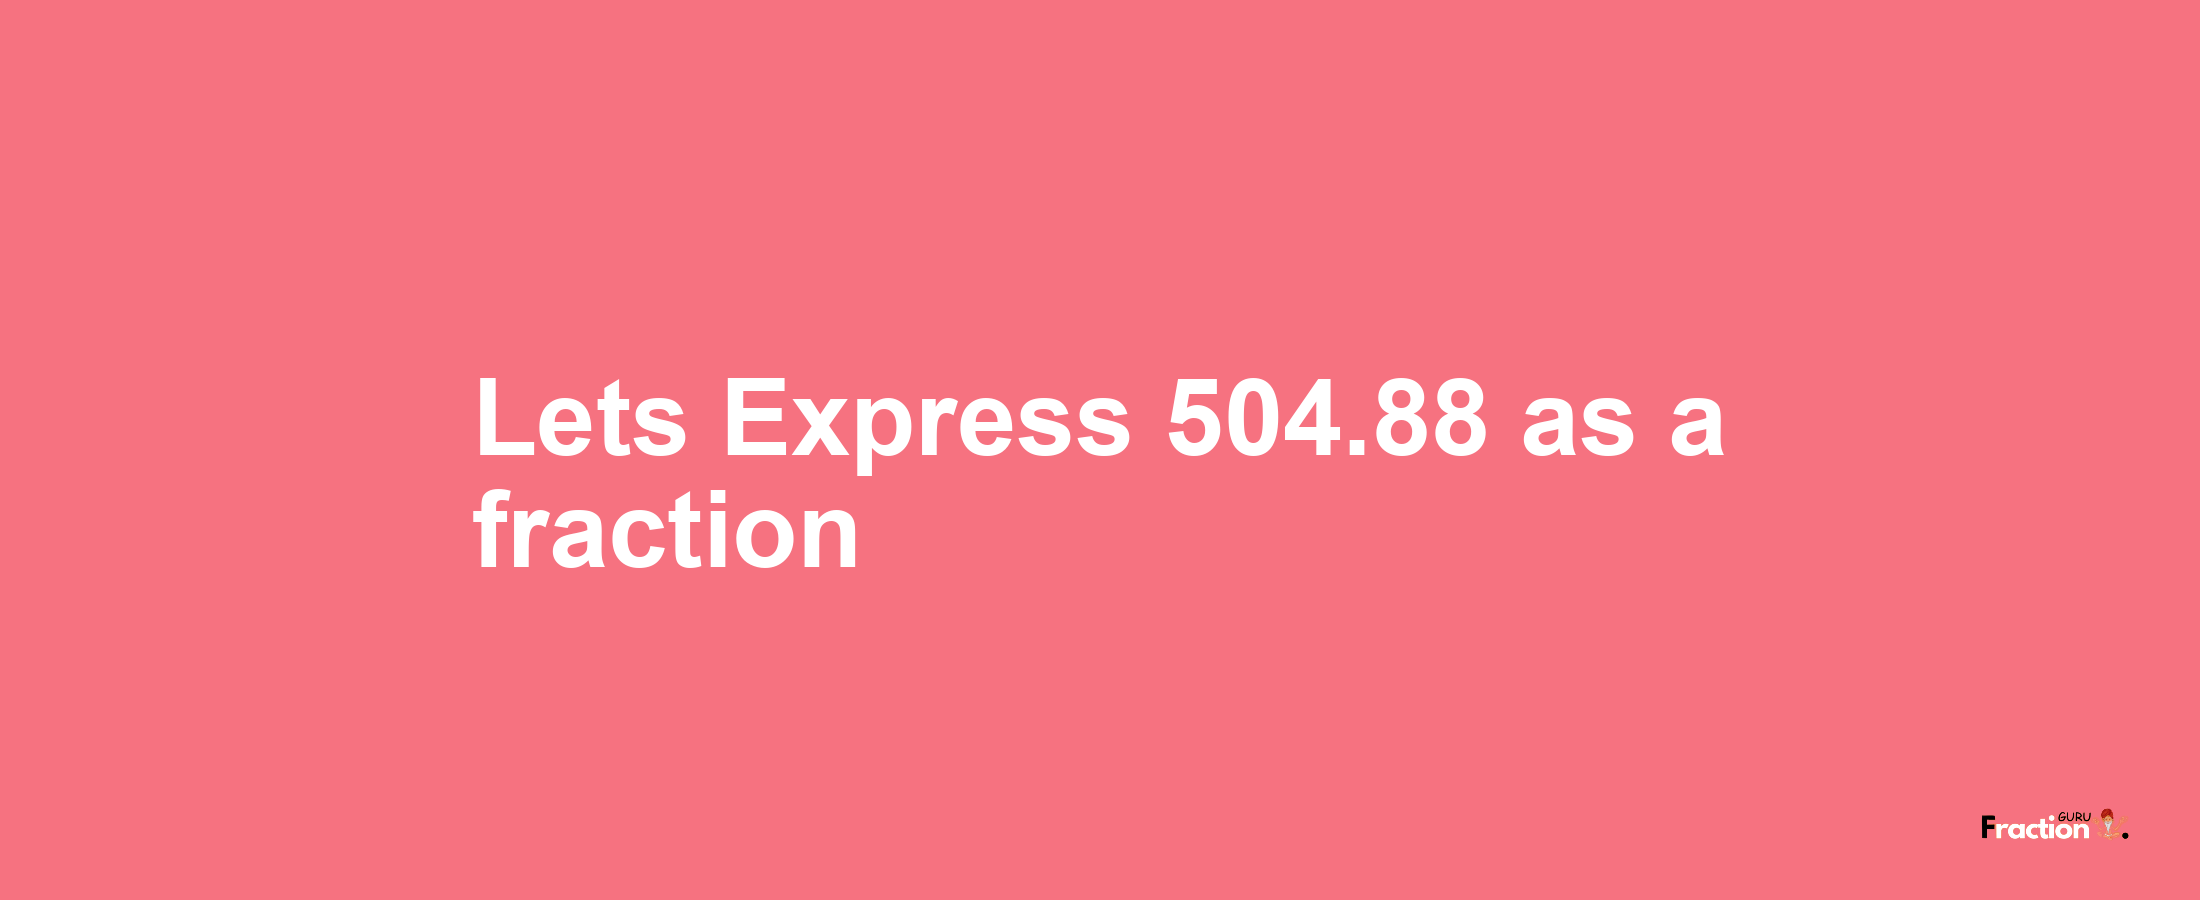 Lets Express 504.88 as afraction